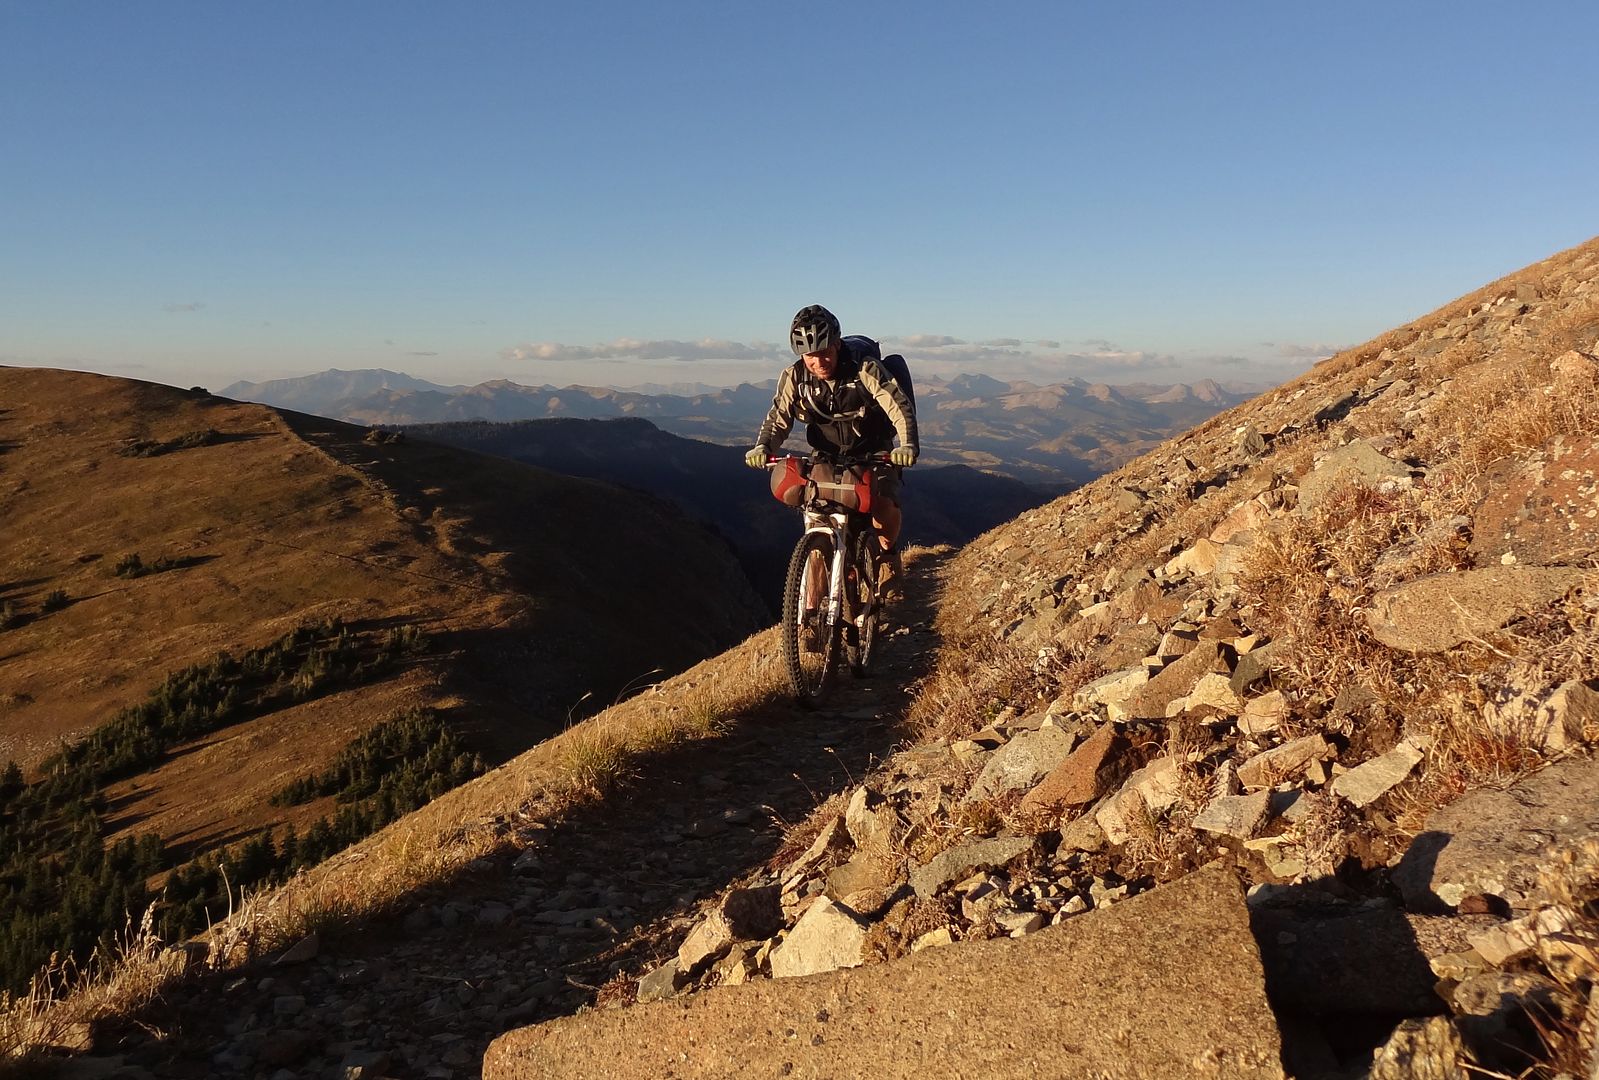 Trip Report Bikepacking The Colorado Trail From Molas Pass To Durango Pic Heavy